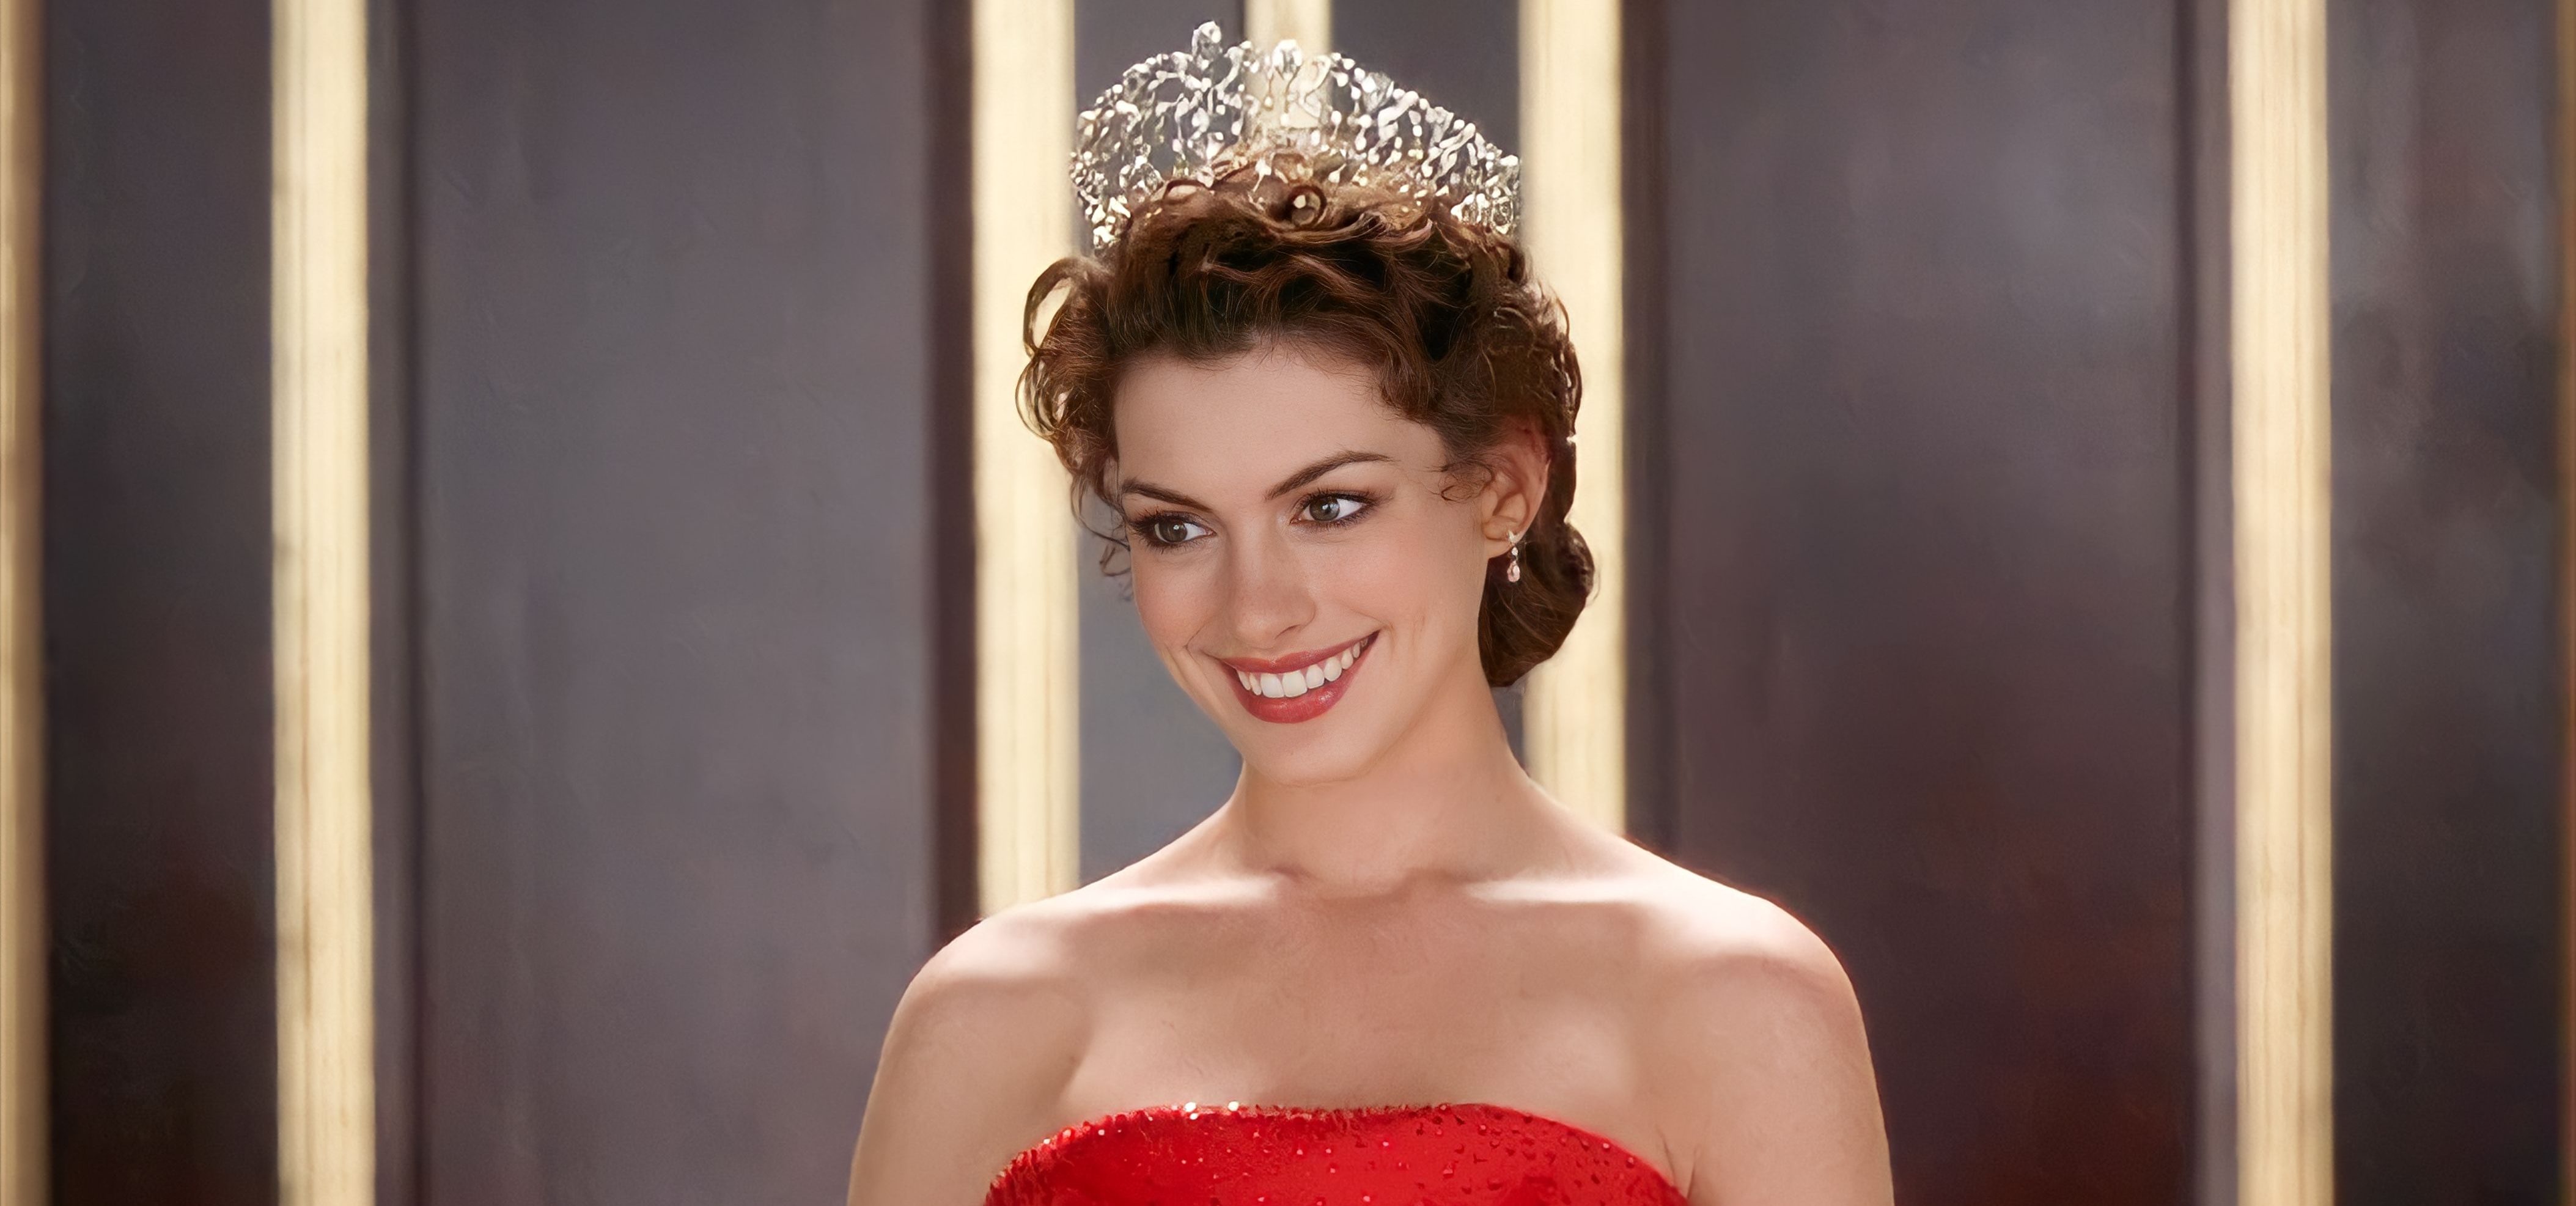 The Princess Diaries 3 Plot Details: A Coming-of-Age Story of a Biracial Teen